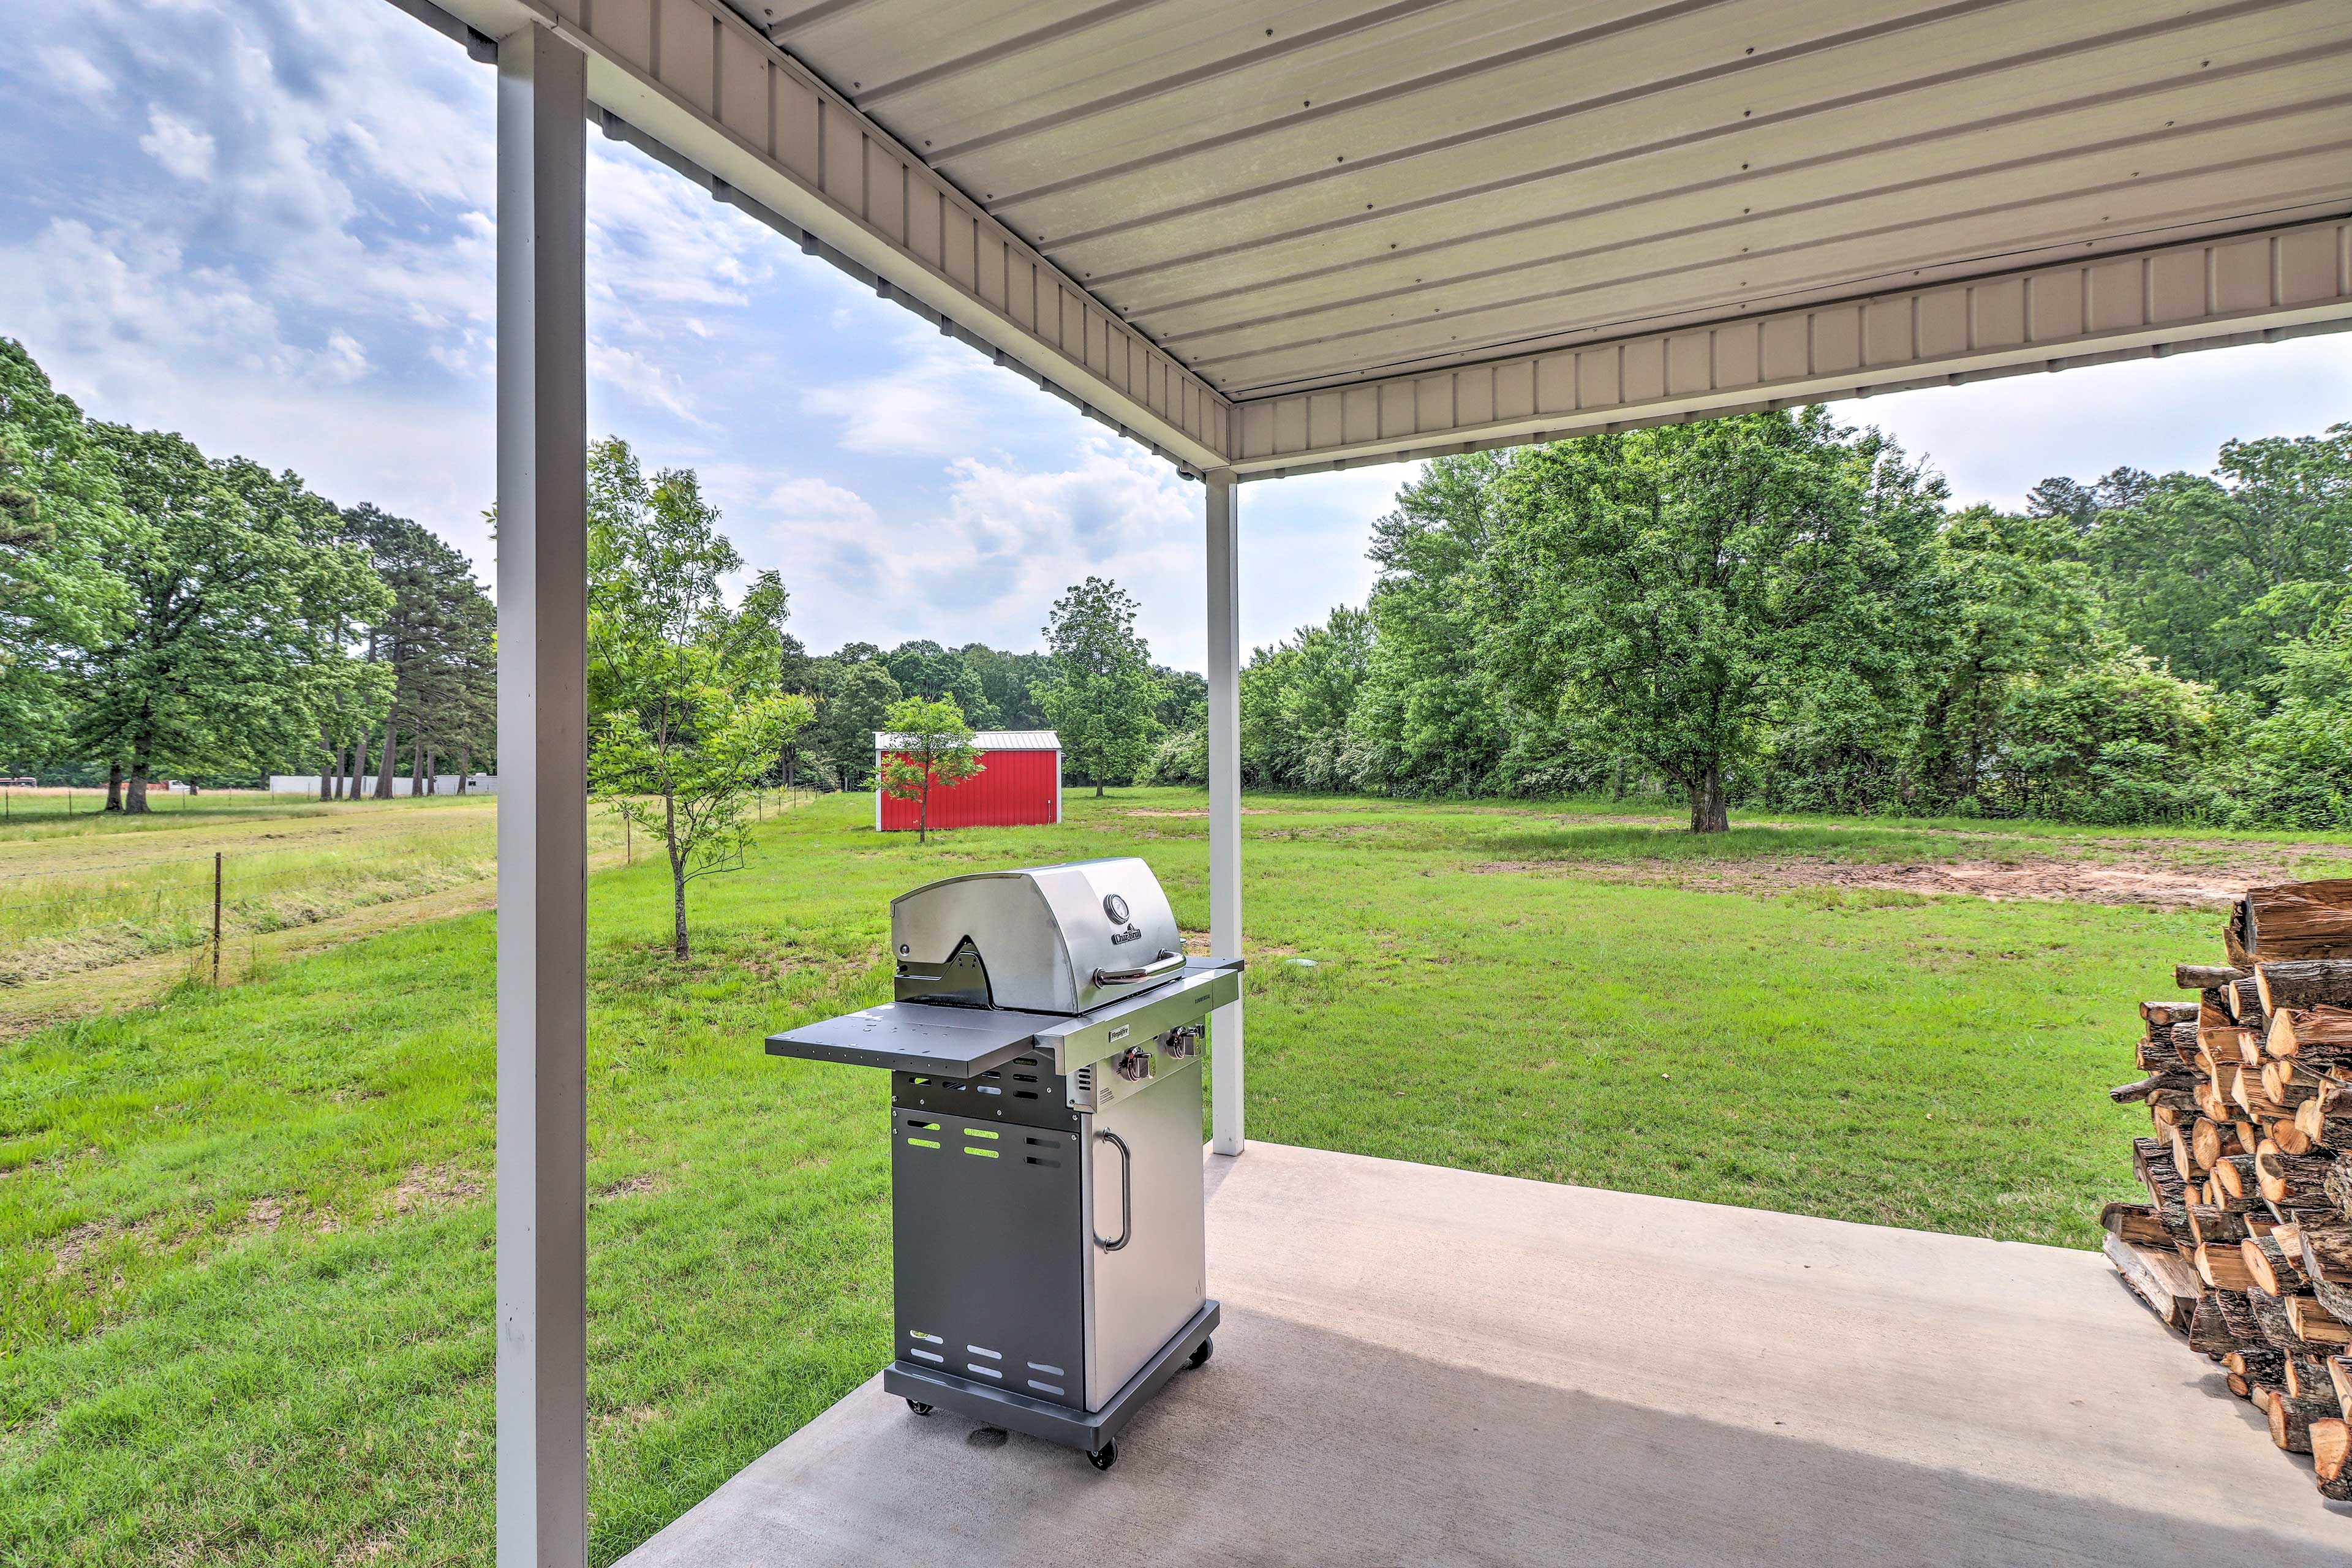 Patio | Gas Grill | Outdoor Dining Area | Fire Pit (Wood Provided)